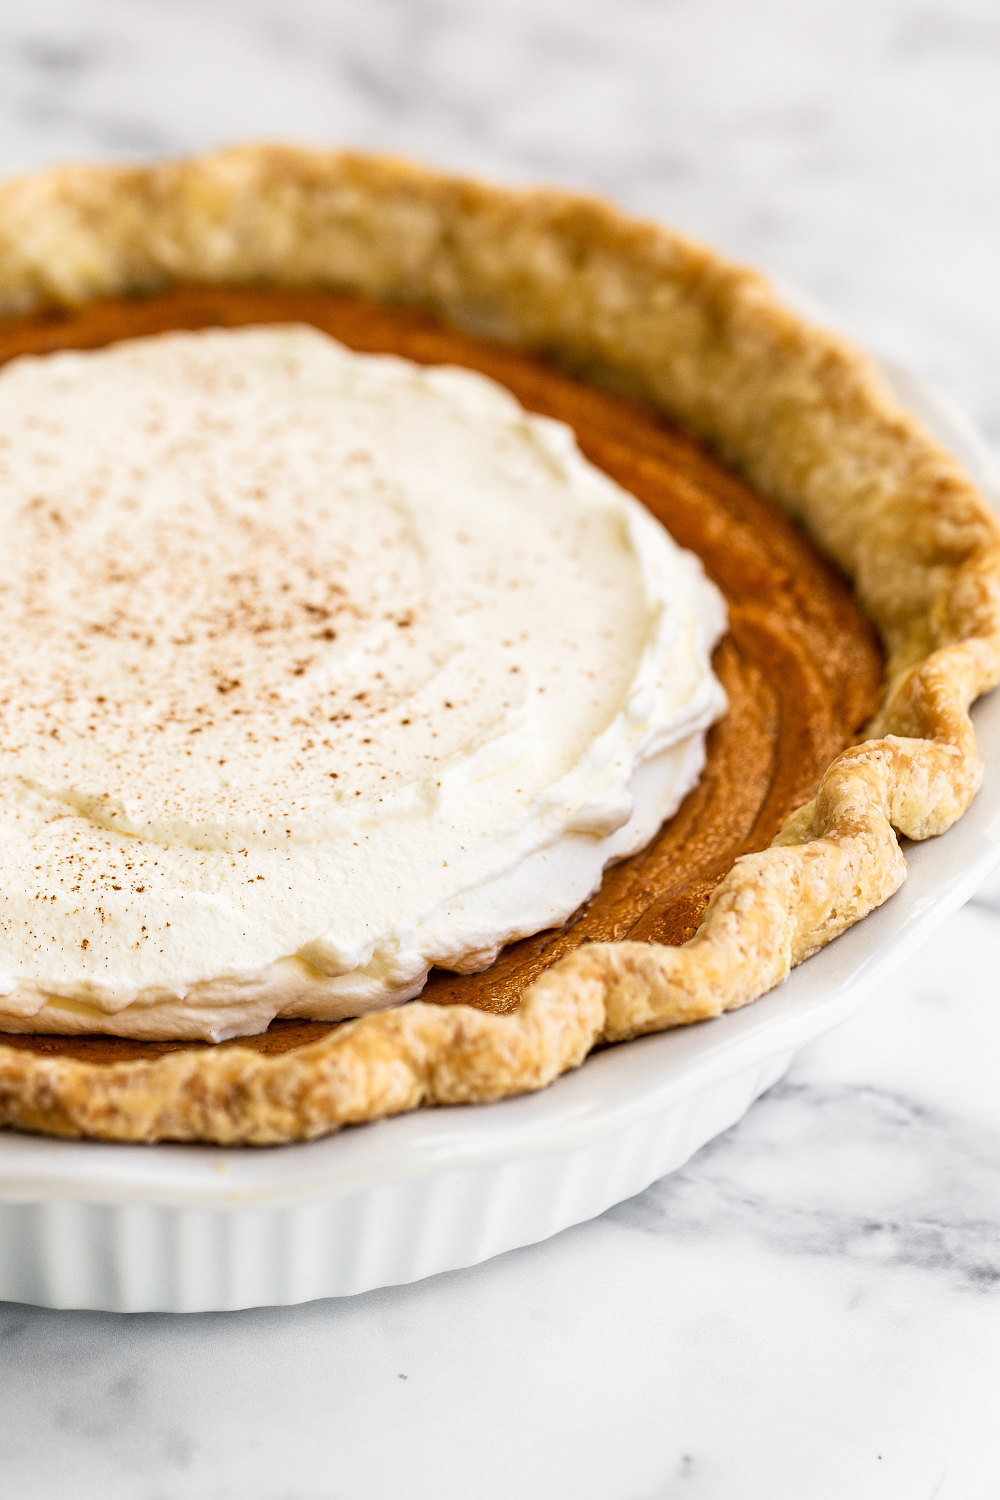 whole, unsliced Brown Butter Sweet Potato Pie in a white ceramic pie dish, with whipped cream and a hint of cinnamon sprinkled on top, ready to slice up and serve.